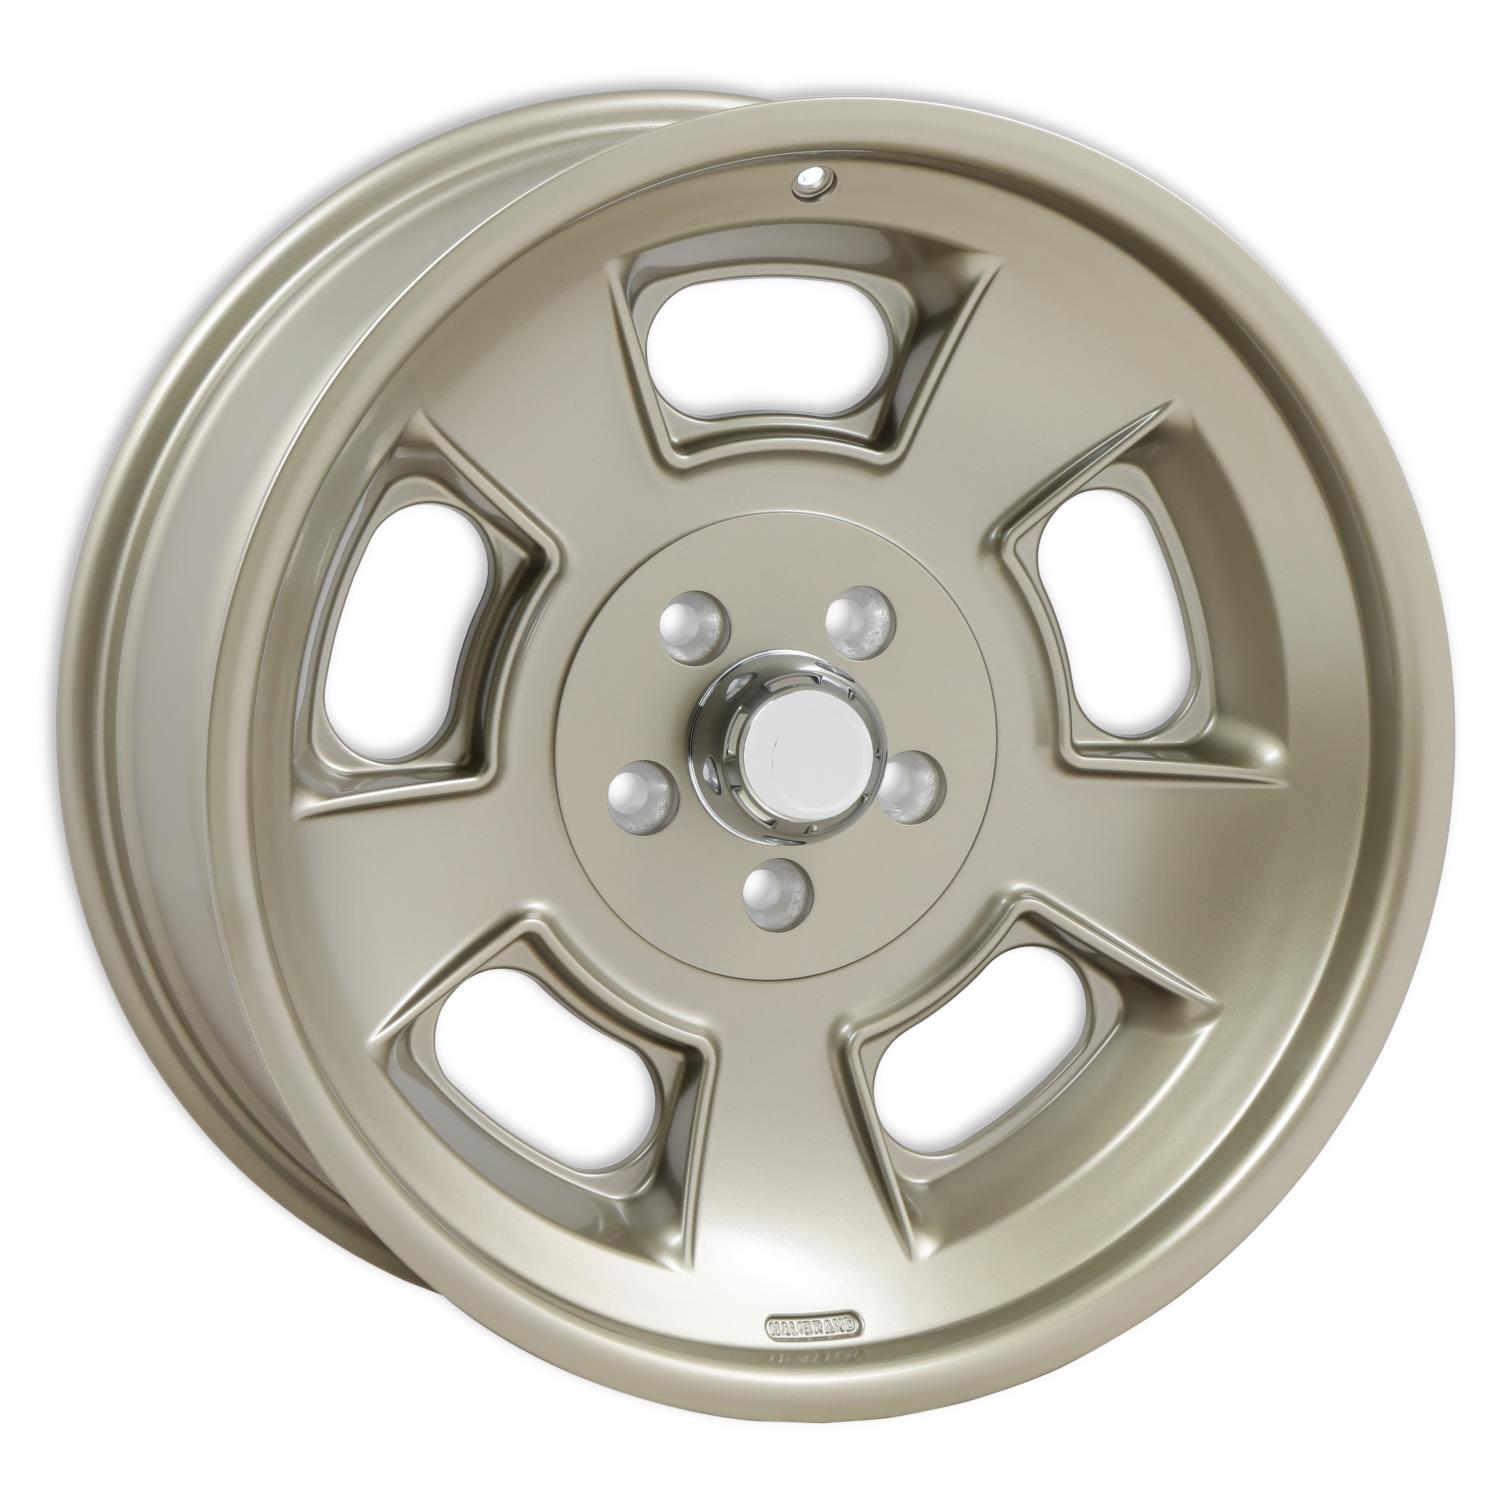 Sprint Front Wheel, Size: 20x8.5", Bolt Pattern: 5x5", Backspace: 4.75" [MAG7 - Semi Gloss Clearcoat]